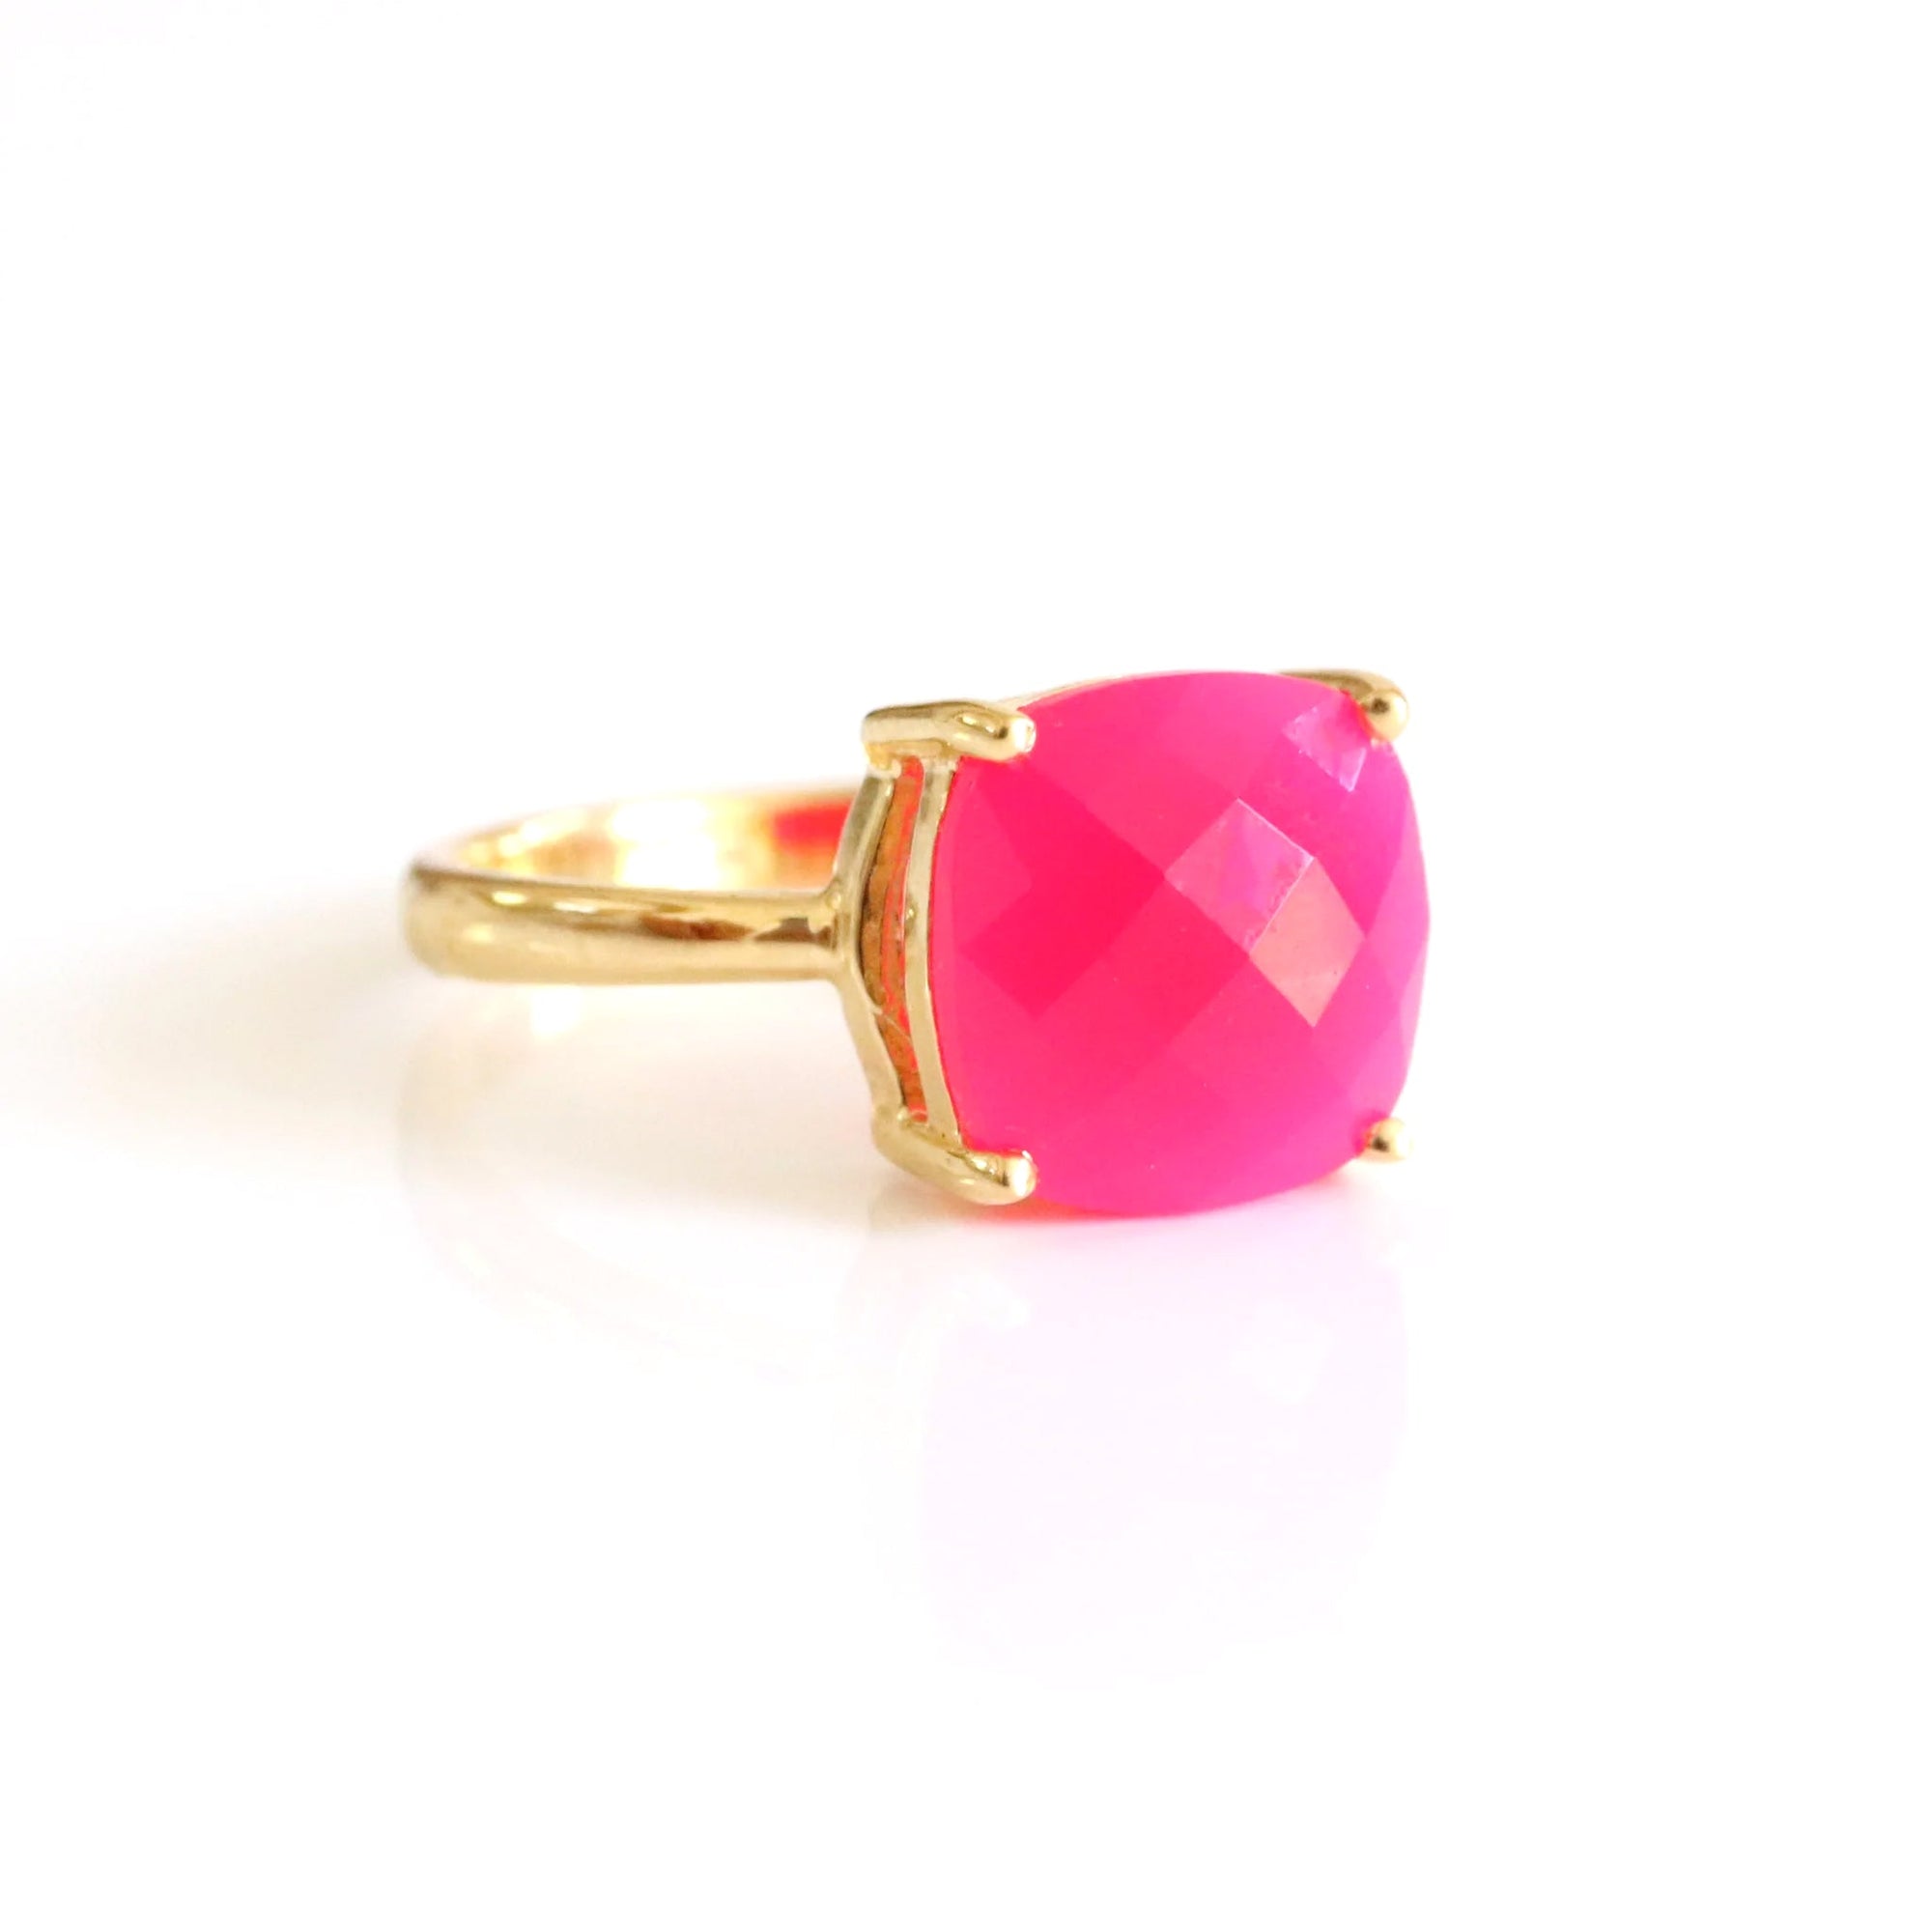 GLEE RING - HOT PINK CHALCEDONY & GOLD - SO PRETTY CARA COTTER